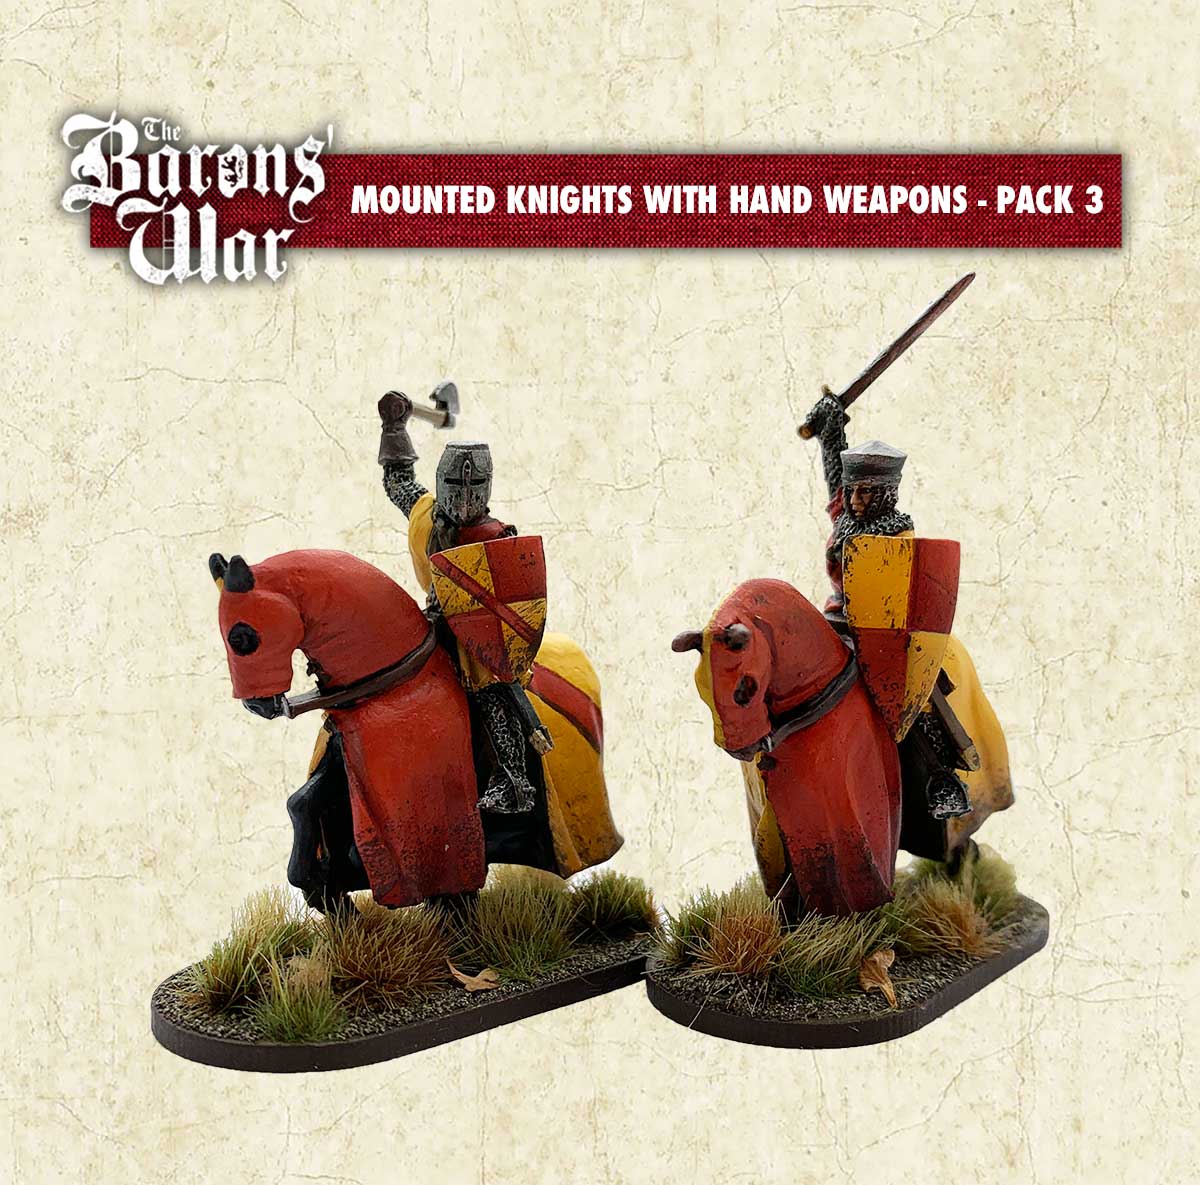 Mounted Knights with Hand Weapons 3 Footsore medieval historical miniatures